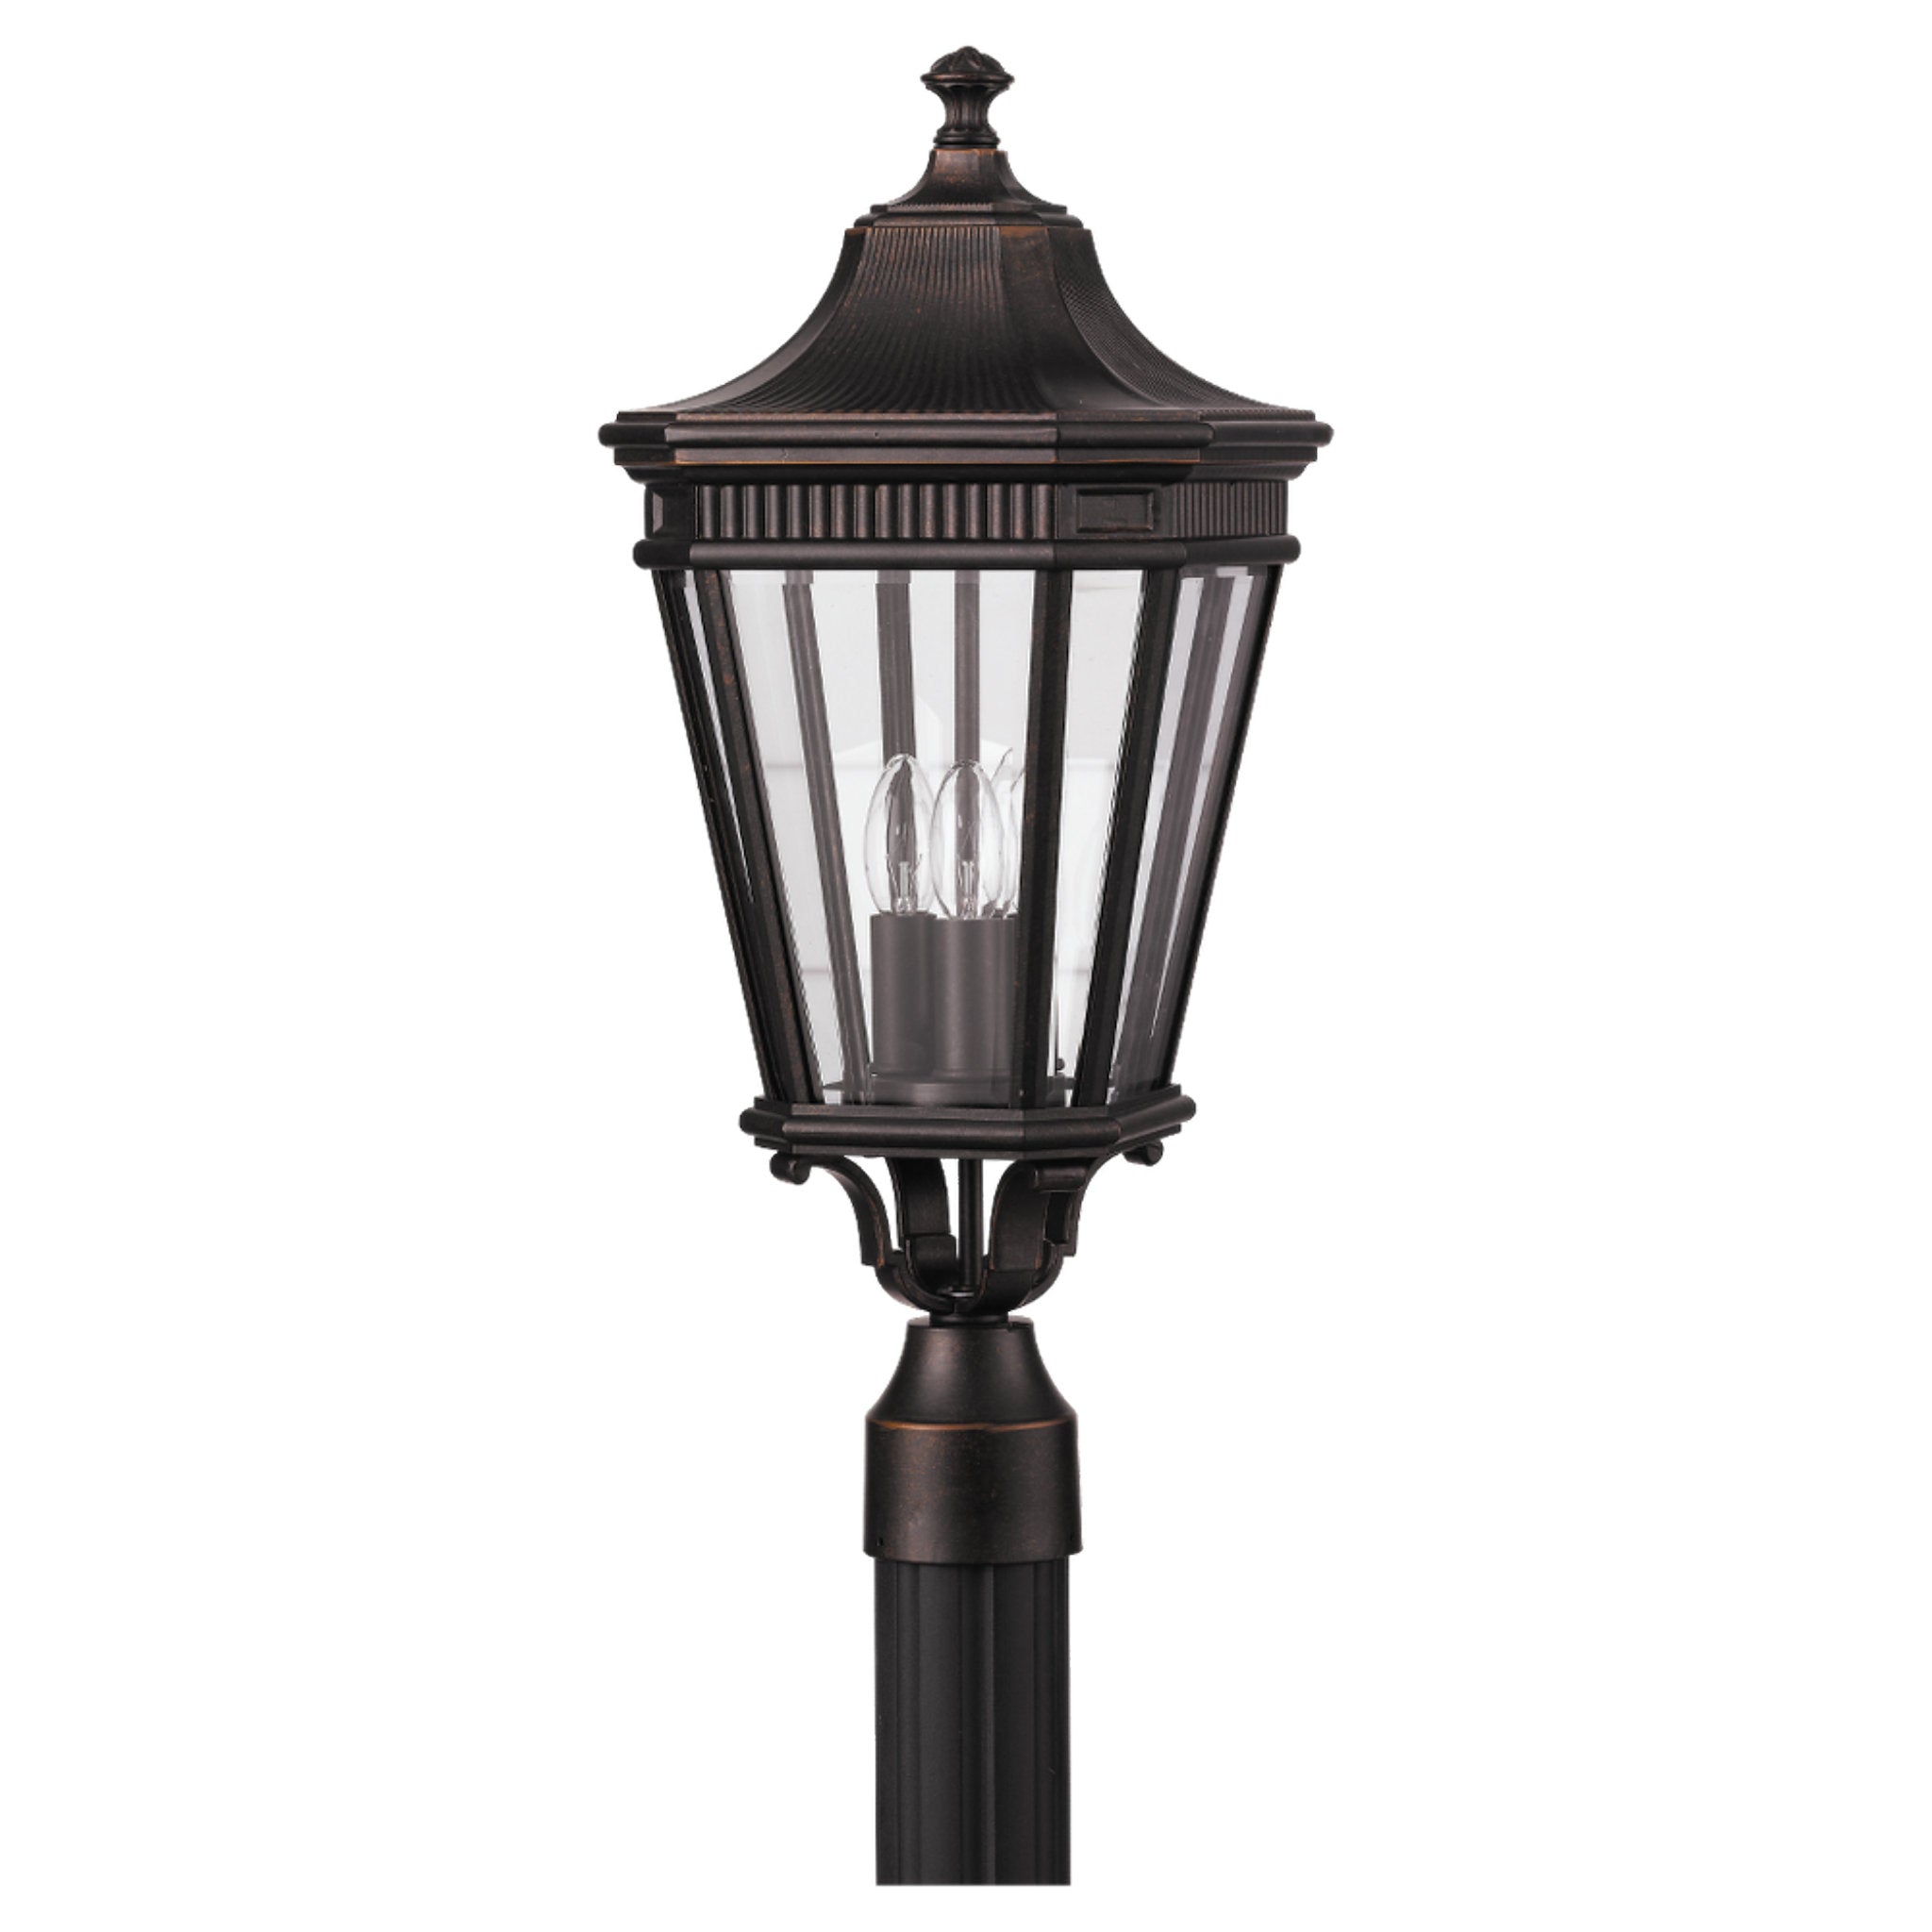 Cotswold Lane Small Post Lantern Traditional Outdoor Fixture 9.5" Width 22.5" Height Aluminum Irregular Clear Beveled Shade in Grecian Bronze